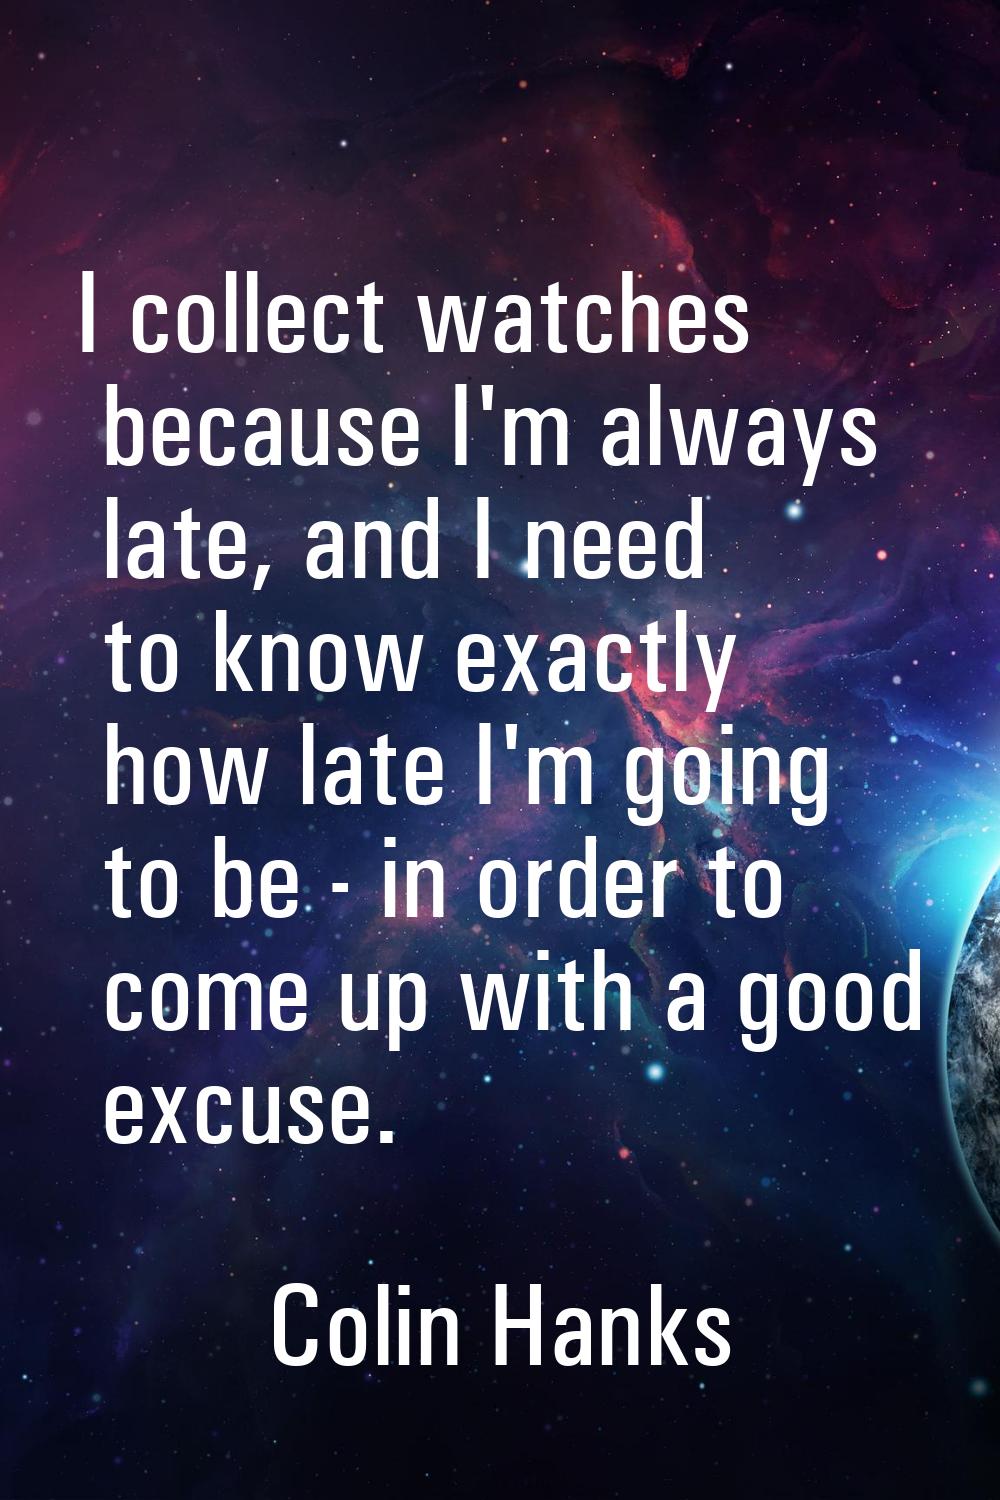 I collect watches because I'm always late, and I need to know exactly how late I'm going to be - in